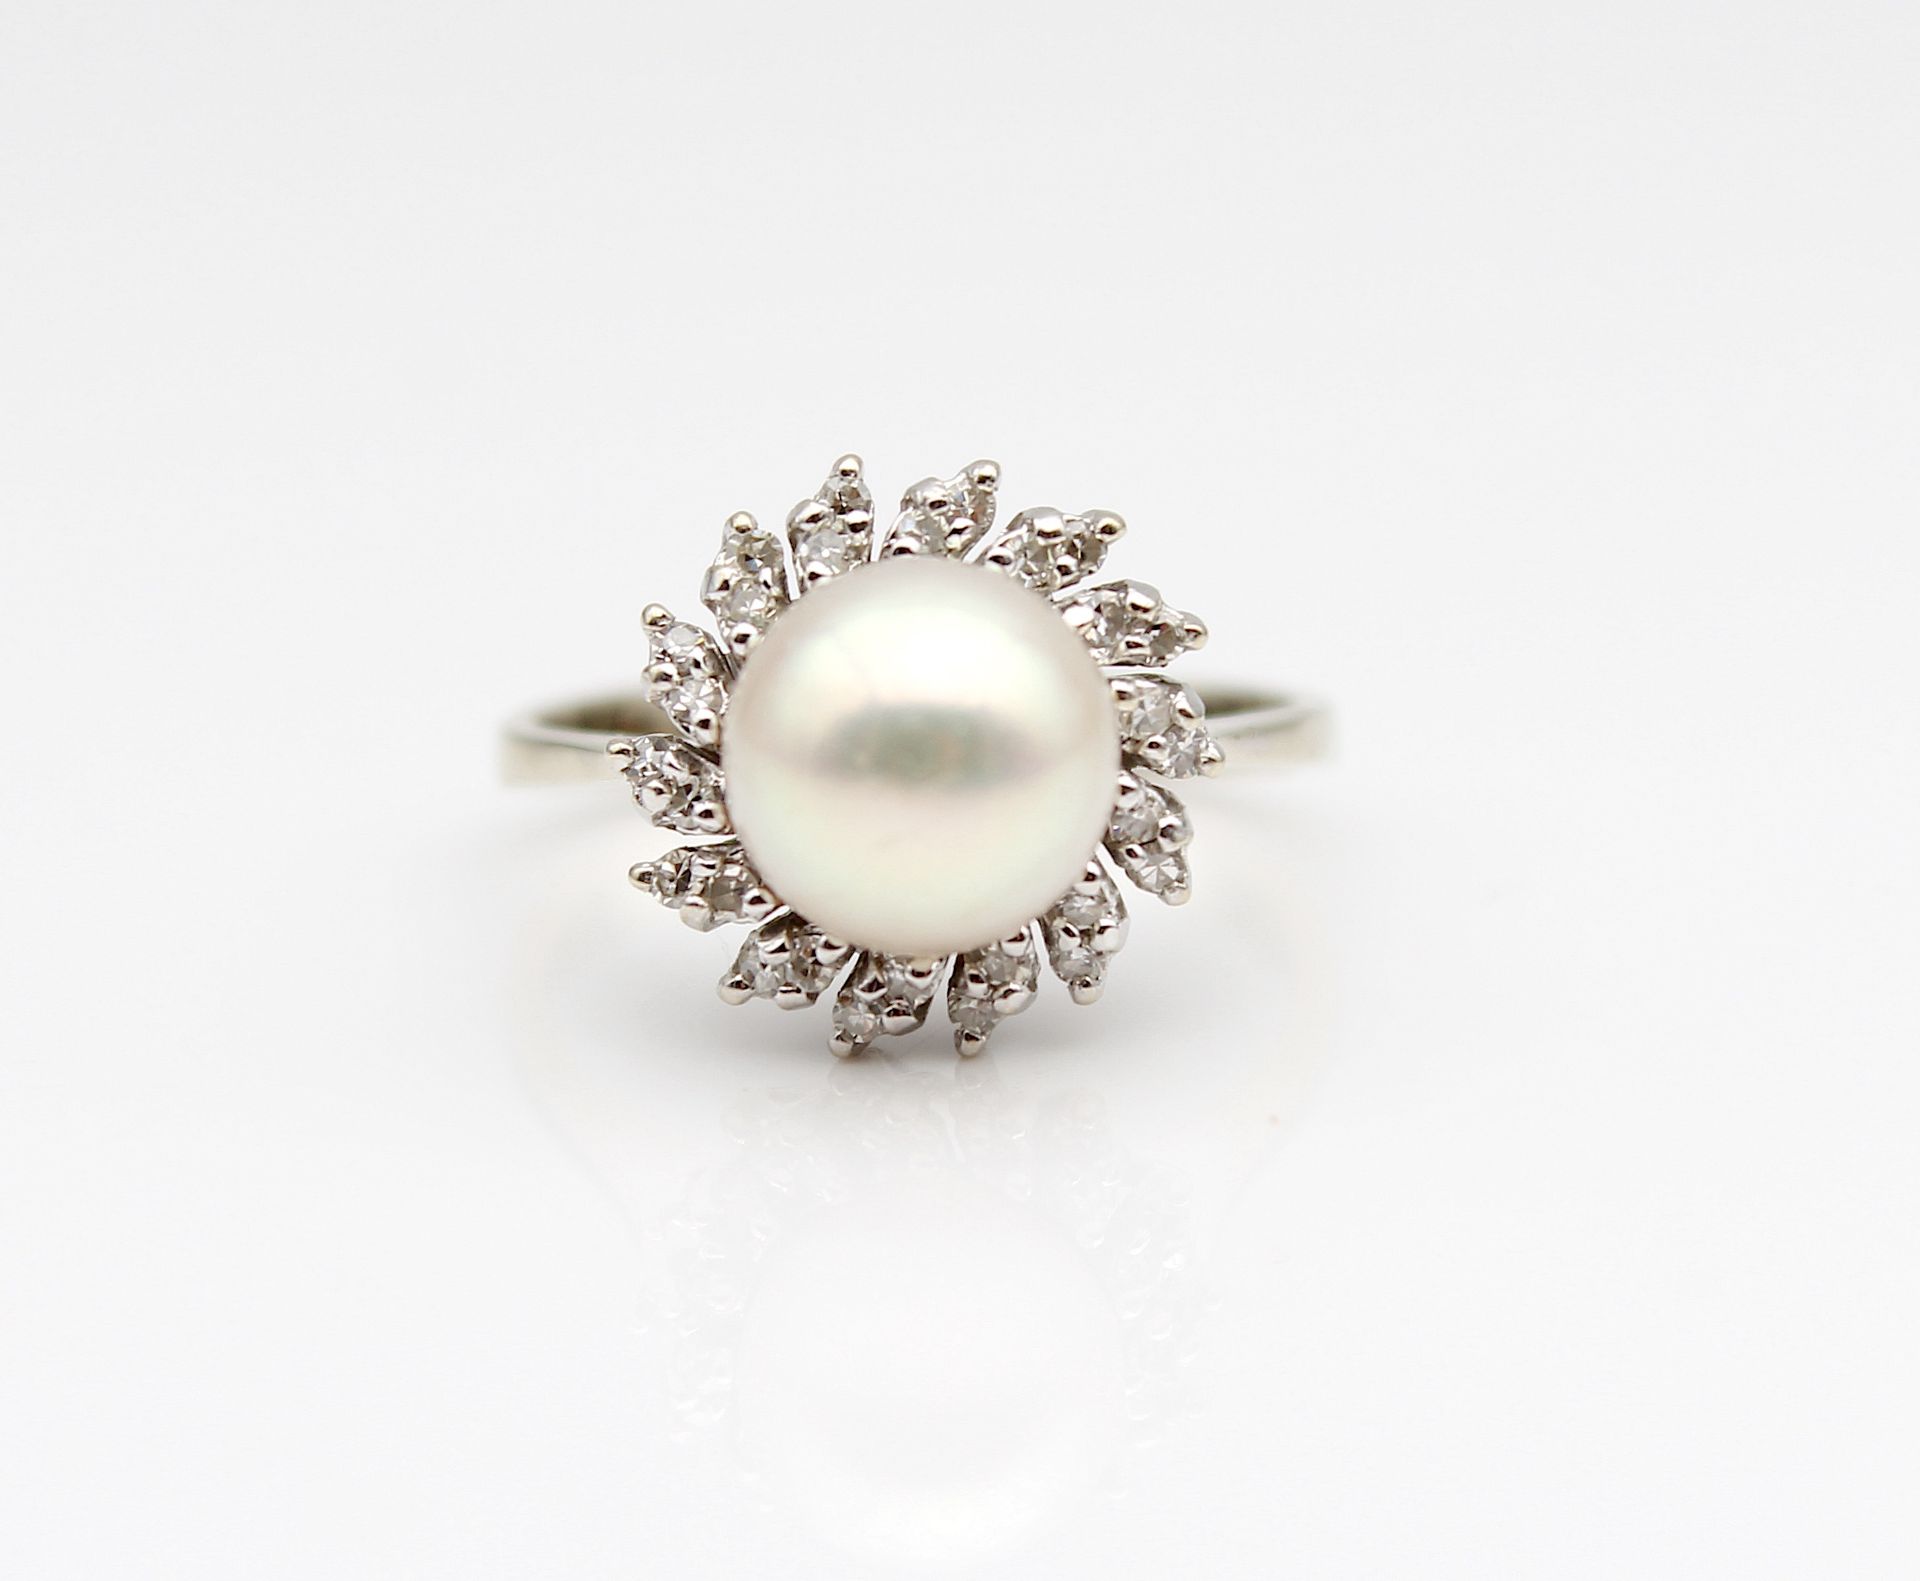 Vintage ring with cultured pearl and diamonds - Image 2 of 4